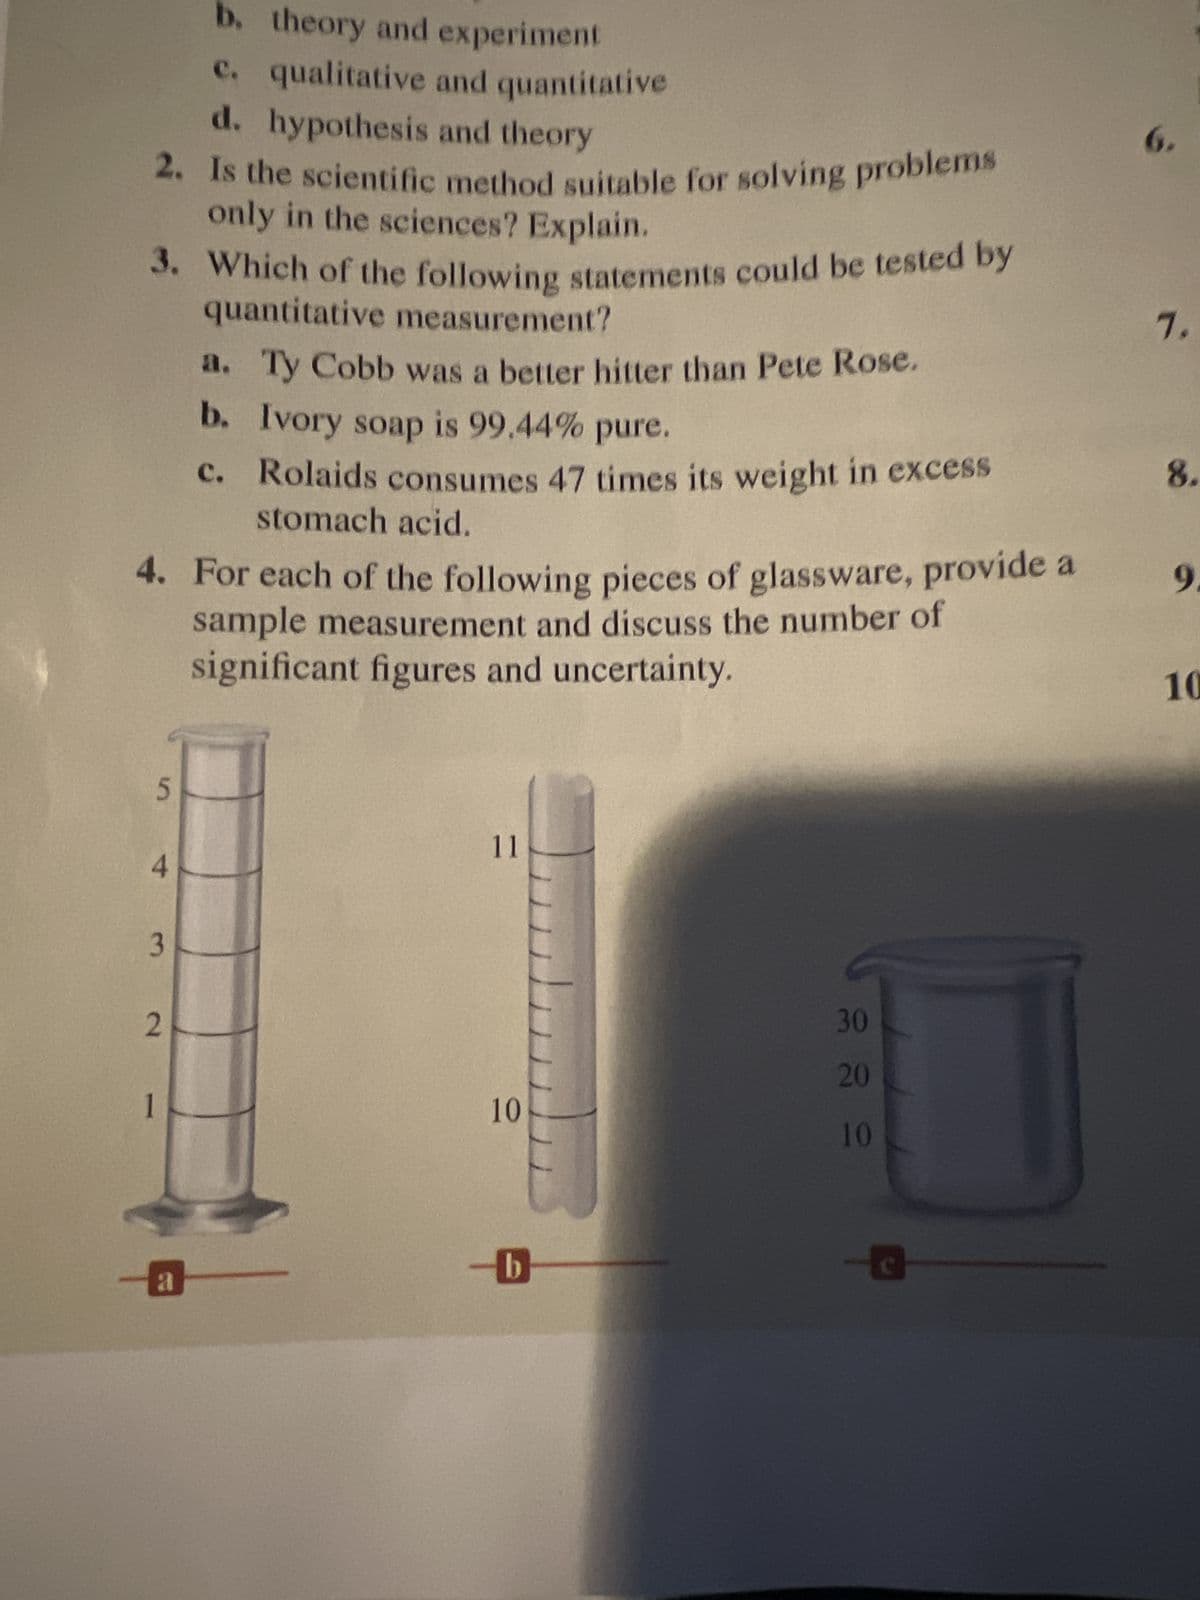 b. theory and experiment
c. qualitative and quantitative
d. hypothesis and theory
2. Is the scientific method suitable for solving problems
only in the sciences? Explain.
3. Which of the following statements could be tested by
quantitative measurement?
4. For each of the following pieces of glassware, provide a
sample measurement and discuss the number of
significant figures and uncertainty.
5
4
3
2
1
a. Ty Cobb was a better hitter than Pete Rose.
b. Ivory soap is 99.44% pure.
c. Rolaids consumes 47 times its weight in excess
stomach acid.
a
11
10
b
30
20
10
6.
7.
8.
9.
10